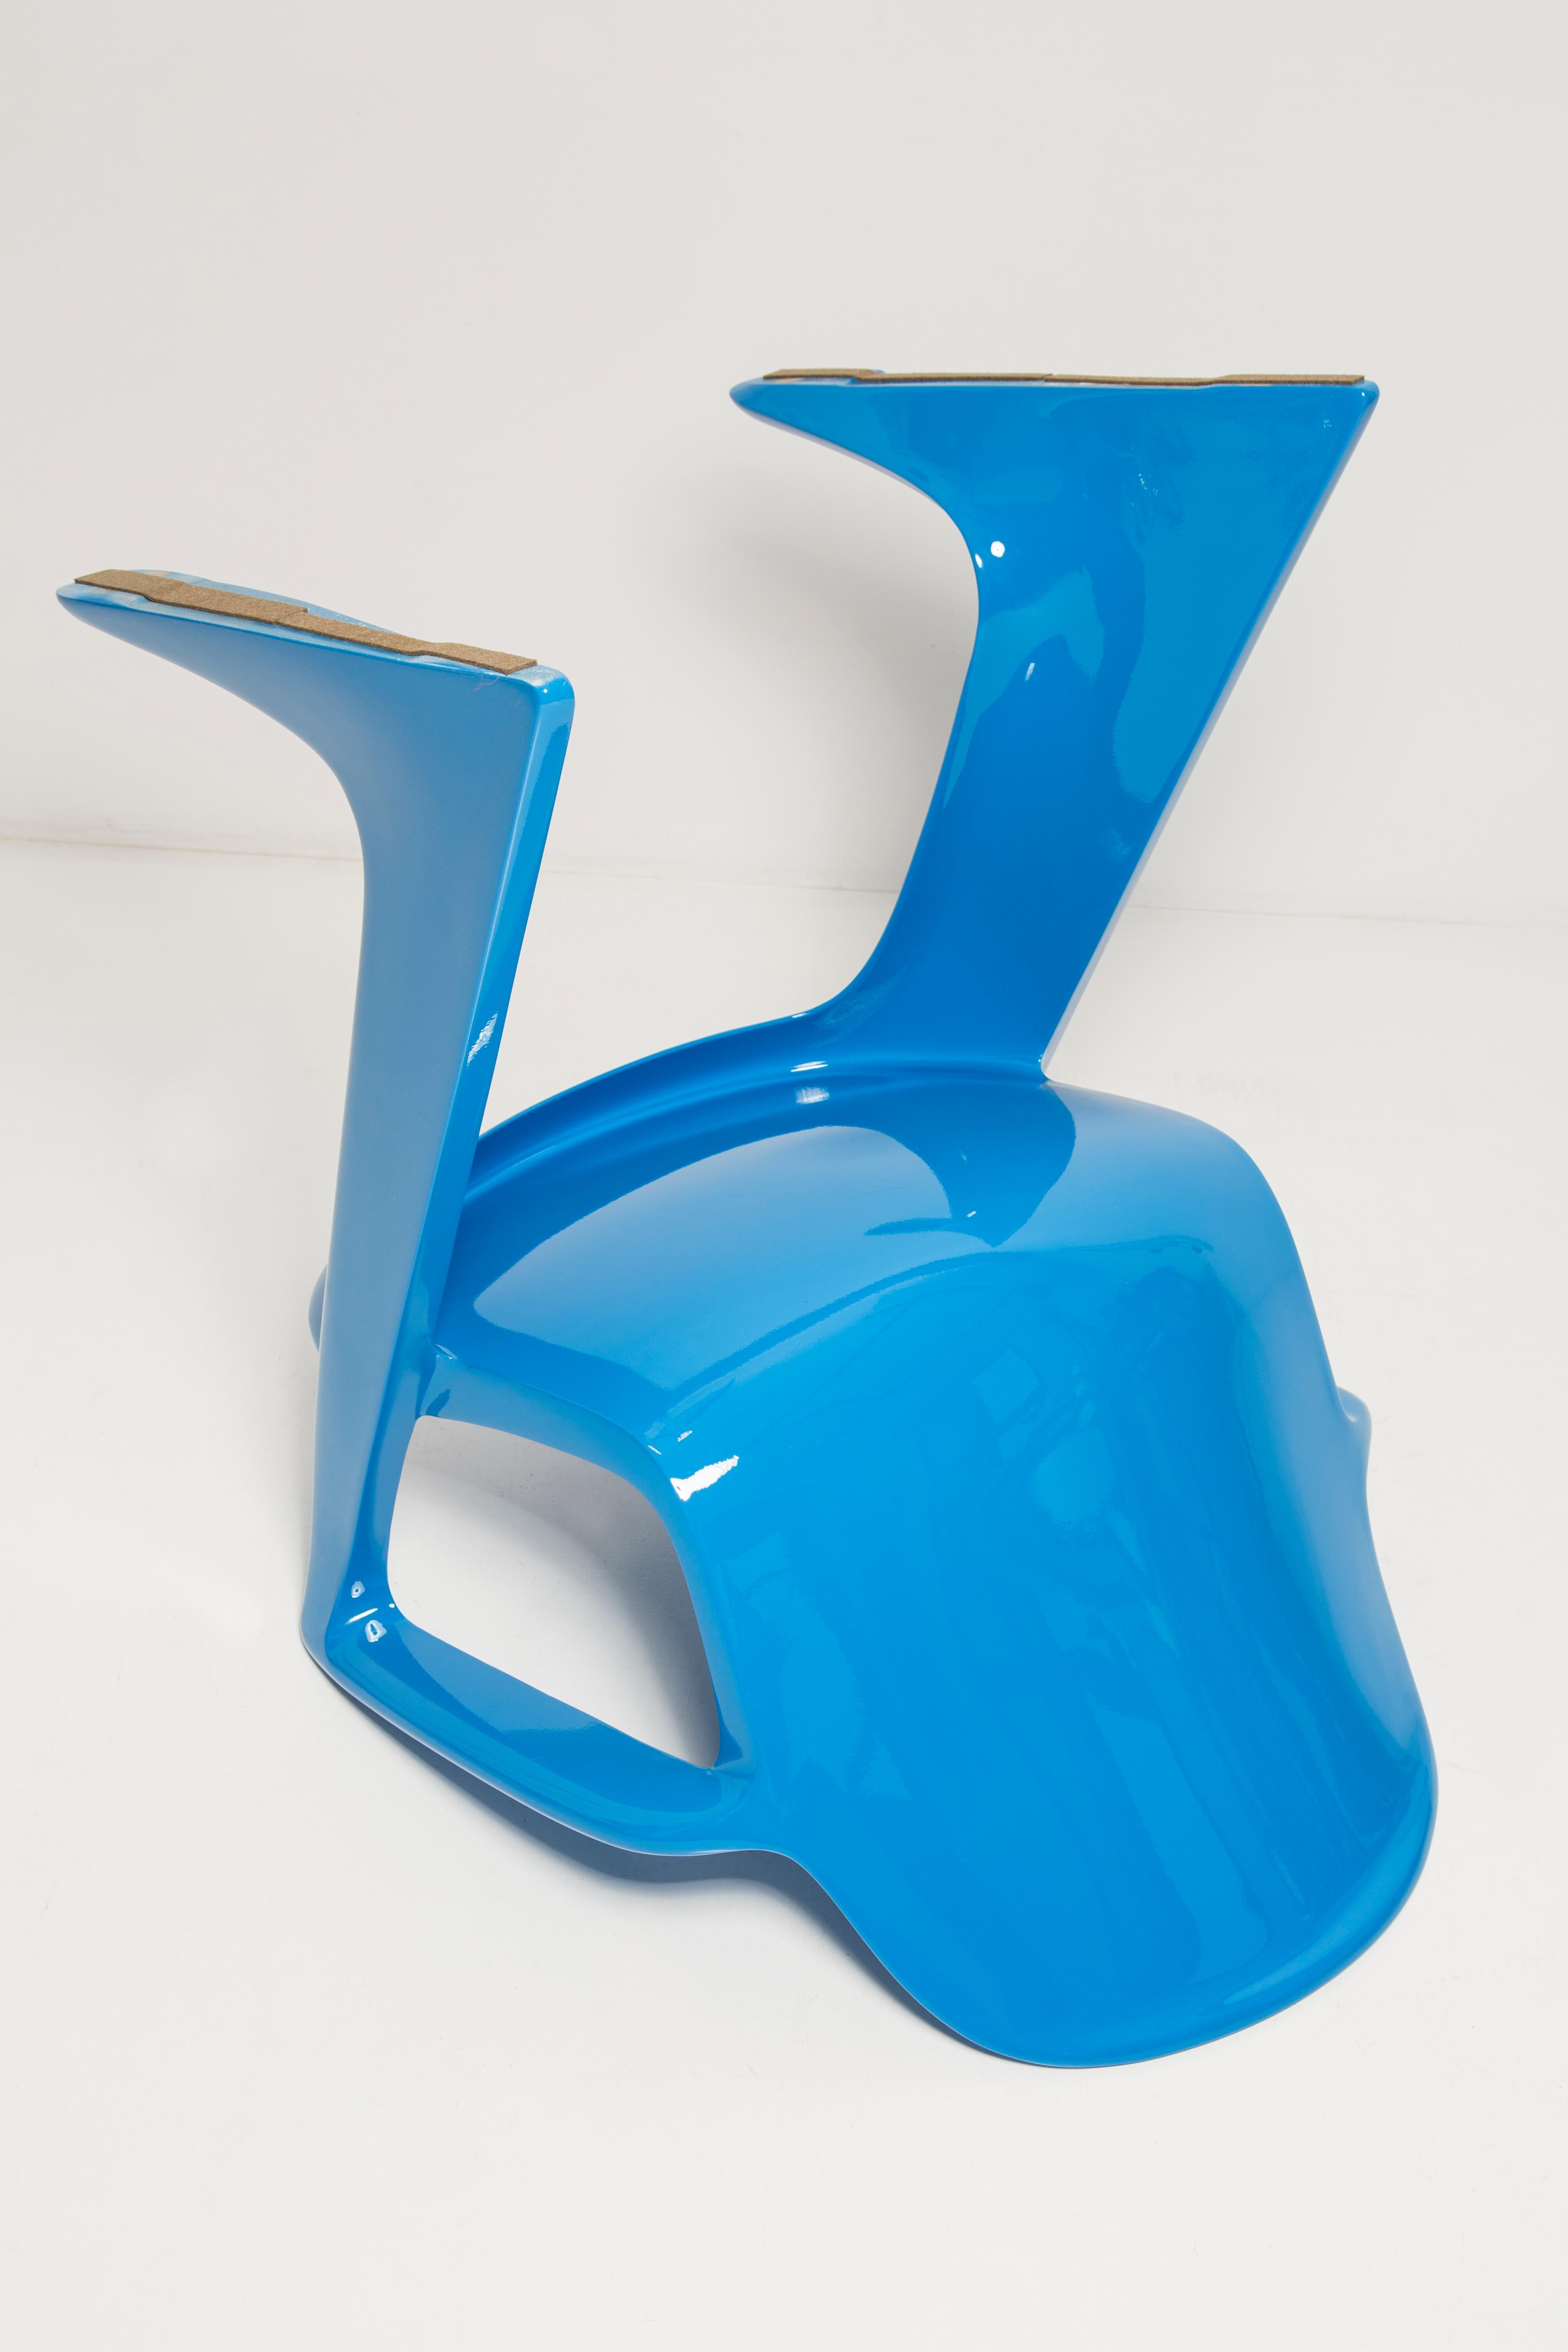 Blue Kangaroo Chair Designed by Ernst Moeckl, Germany, 1968 For Sale 2